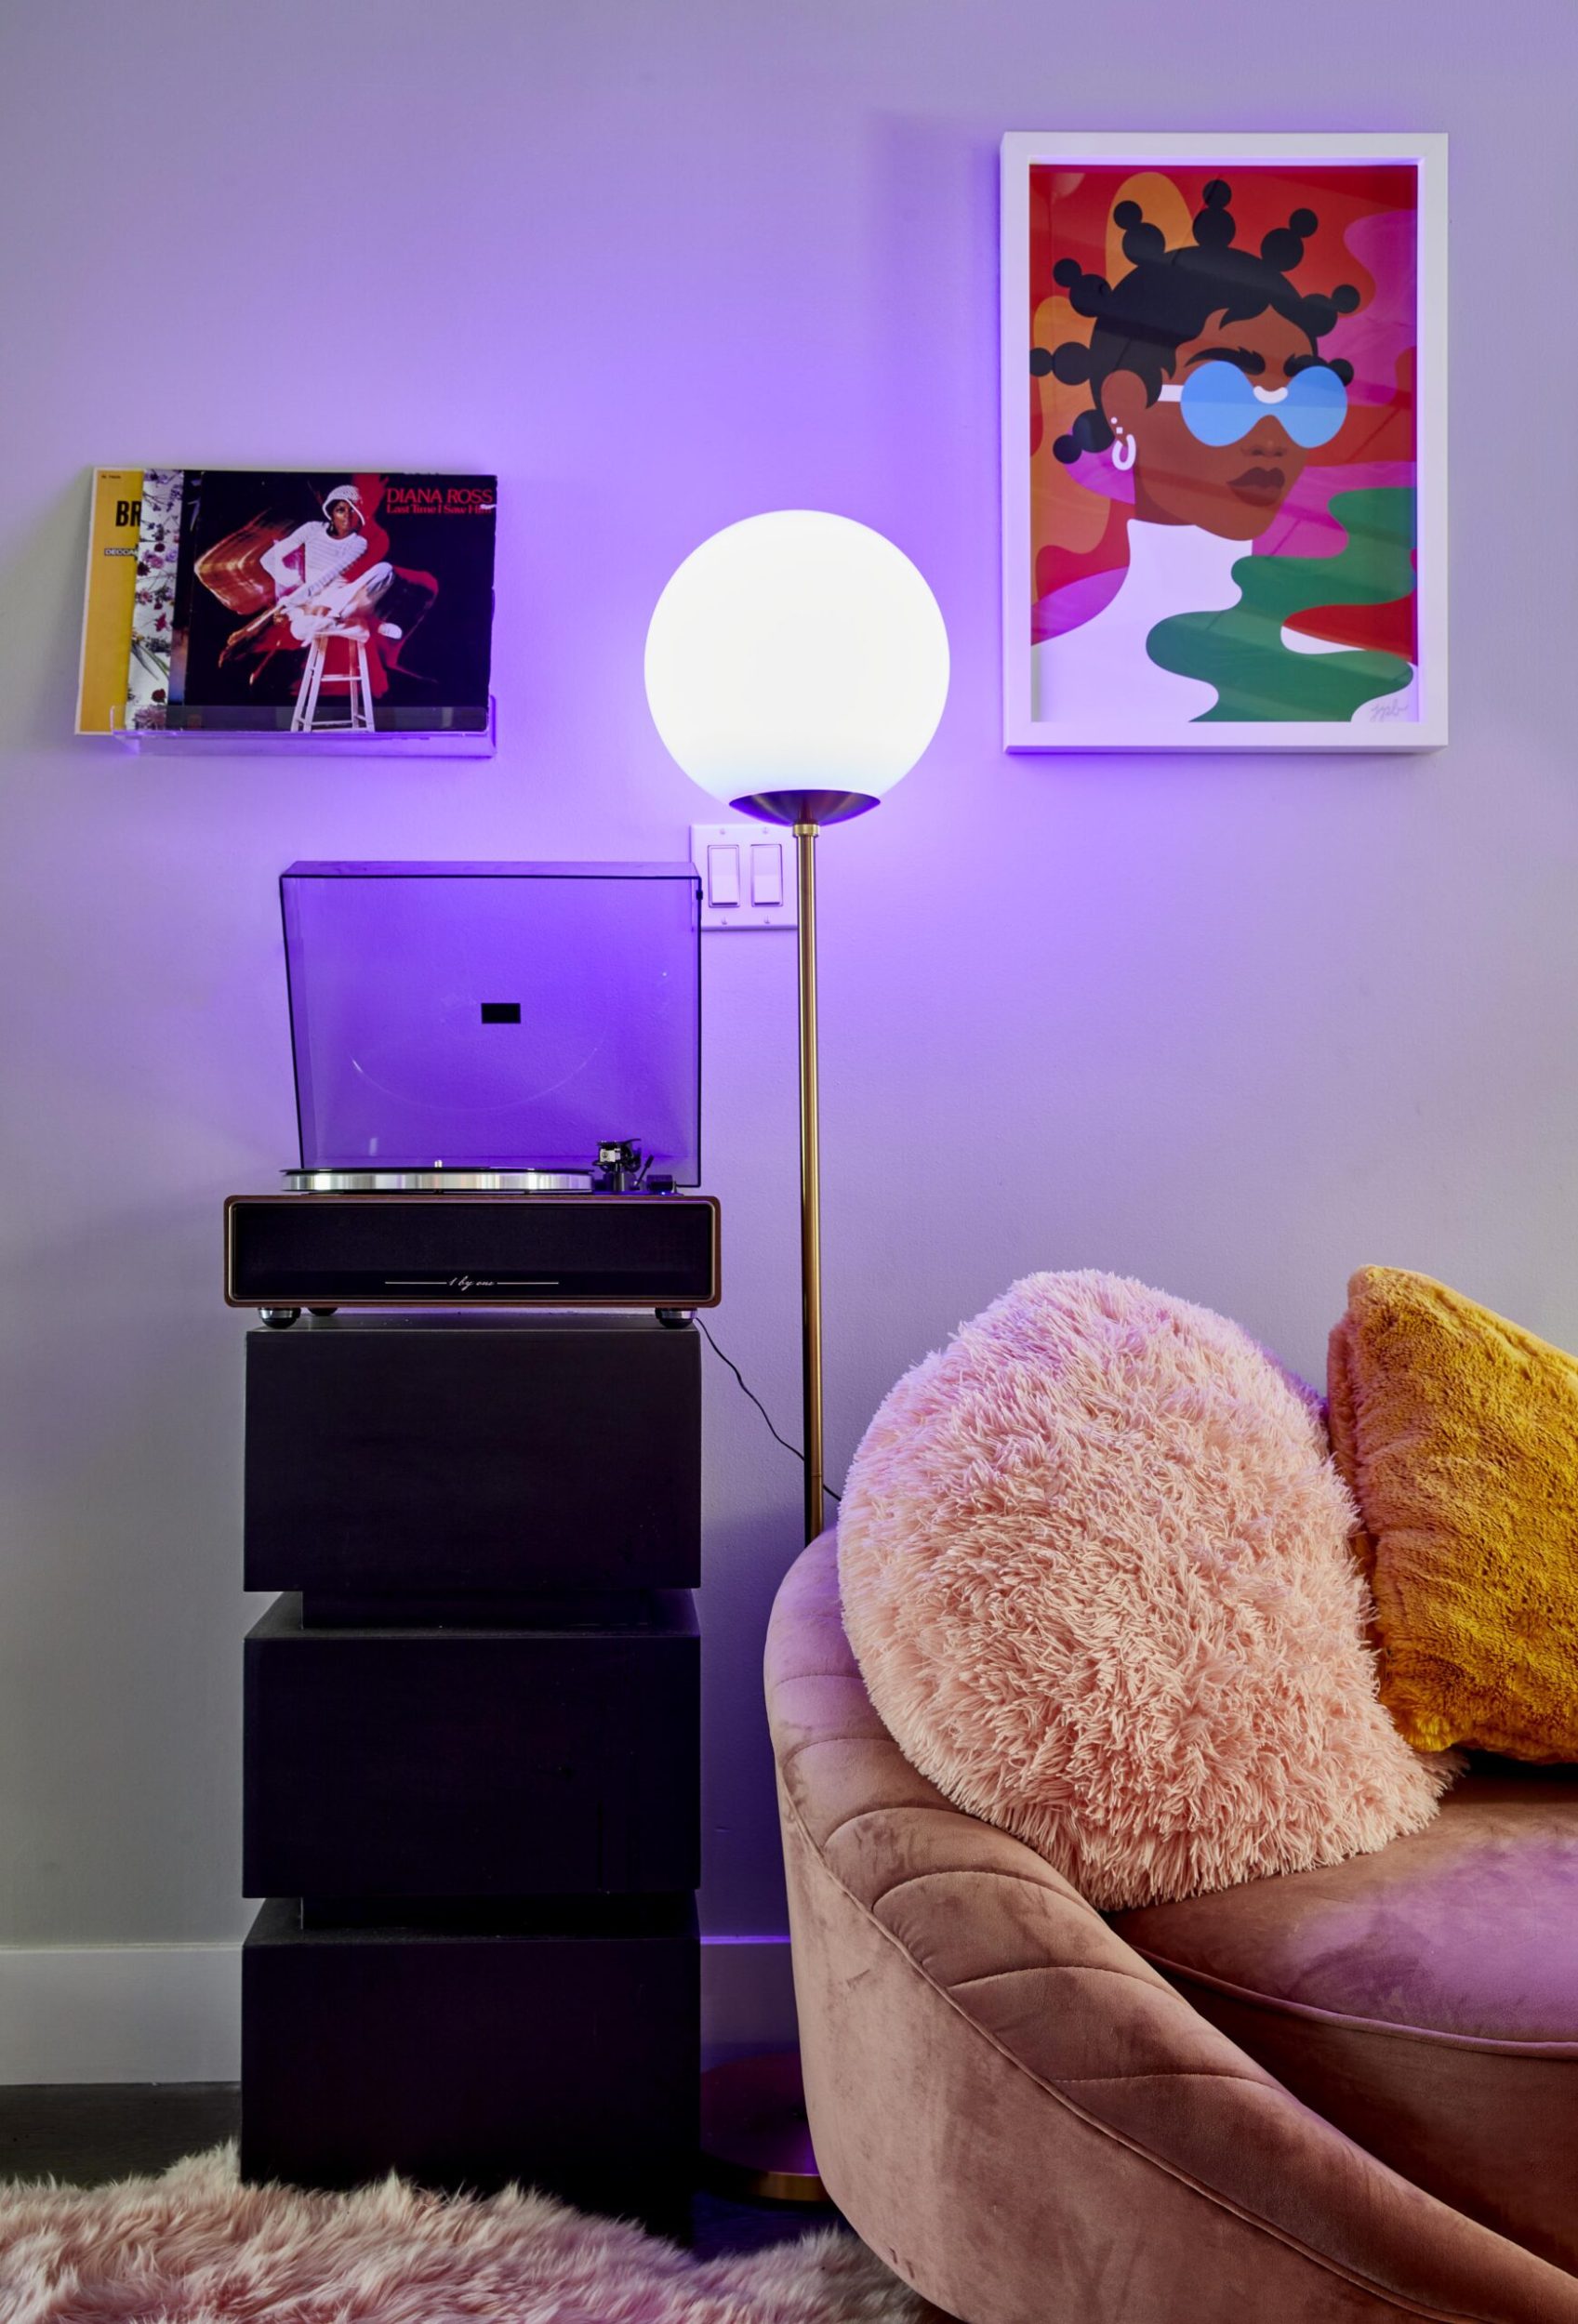 Parris Goebel living room with hanging art, a blue neon lamp, pink velvet couch 